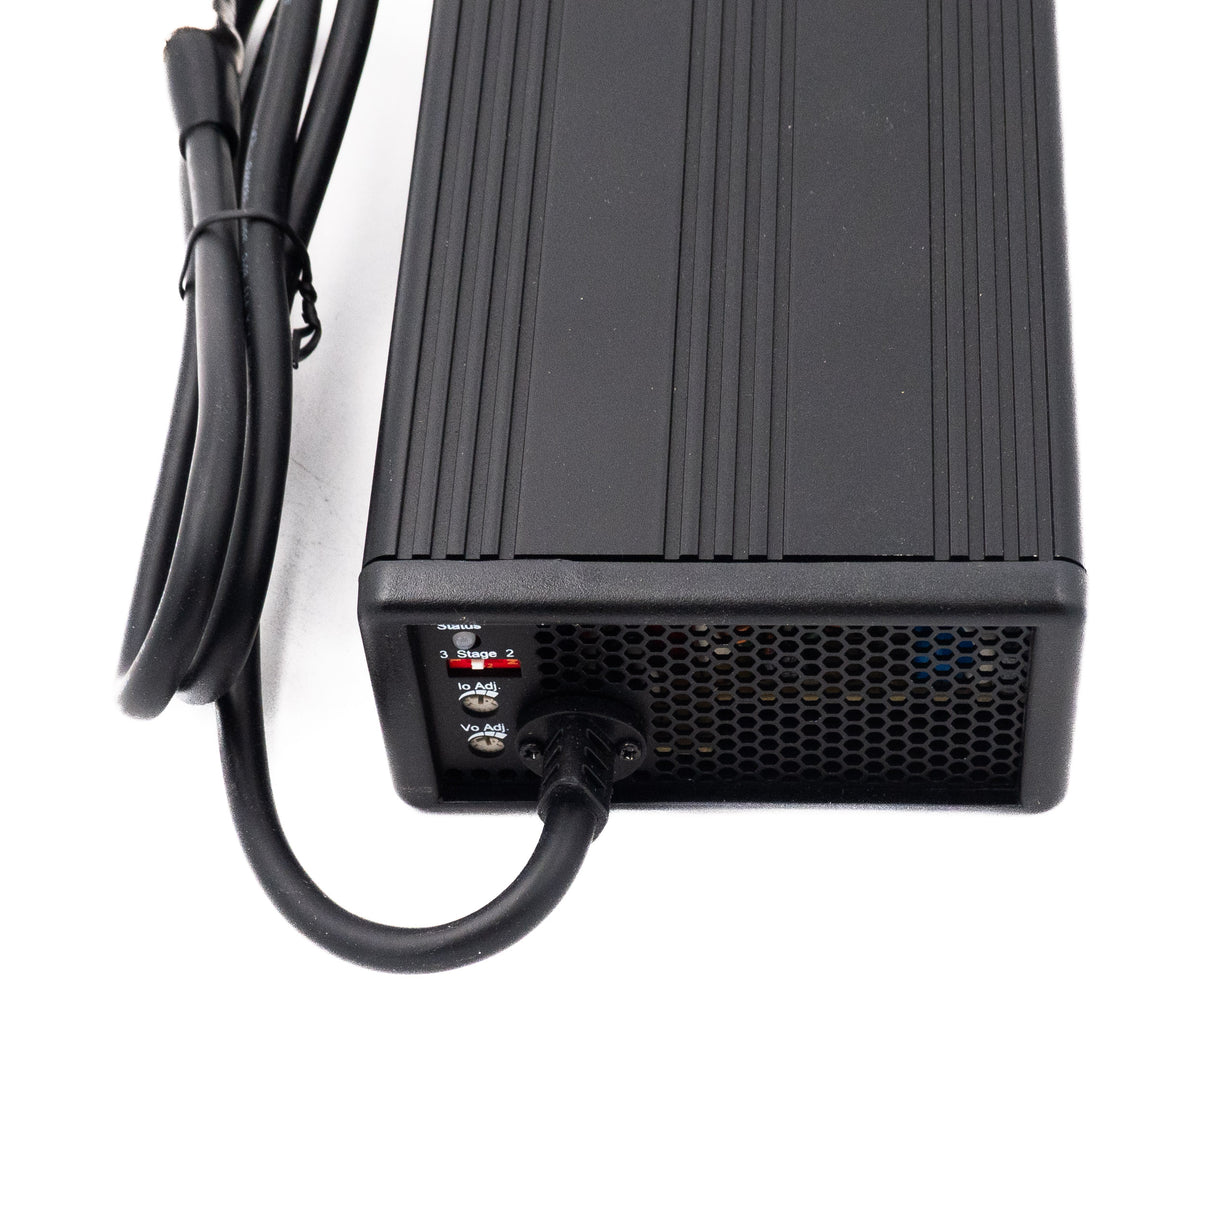 Mean Well NPB-240-24XLR Battery Charger 240W 24V 3 Pin Power Pin - PHOTO 3